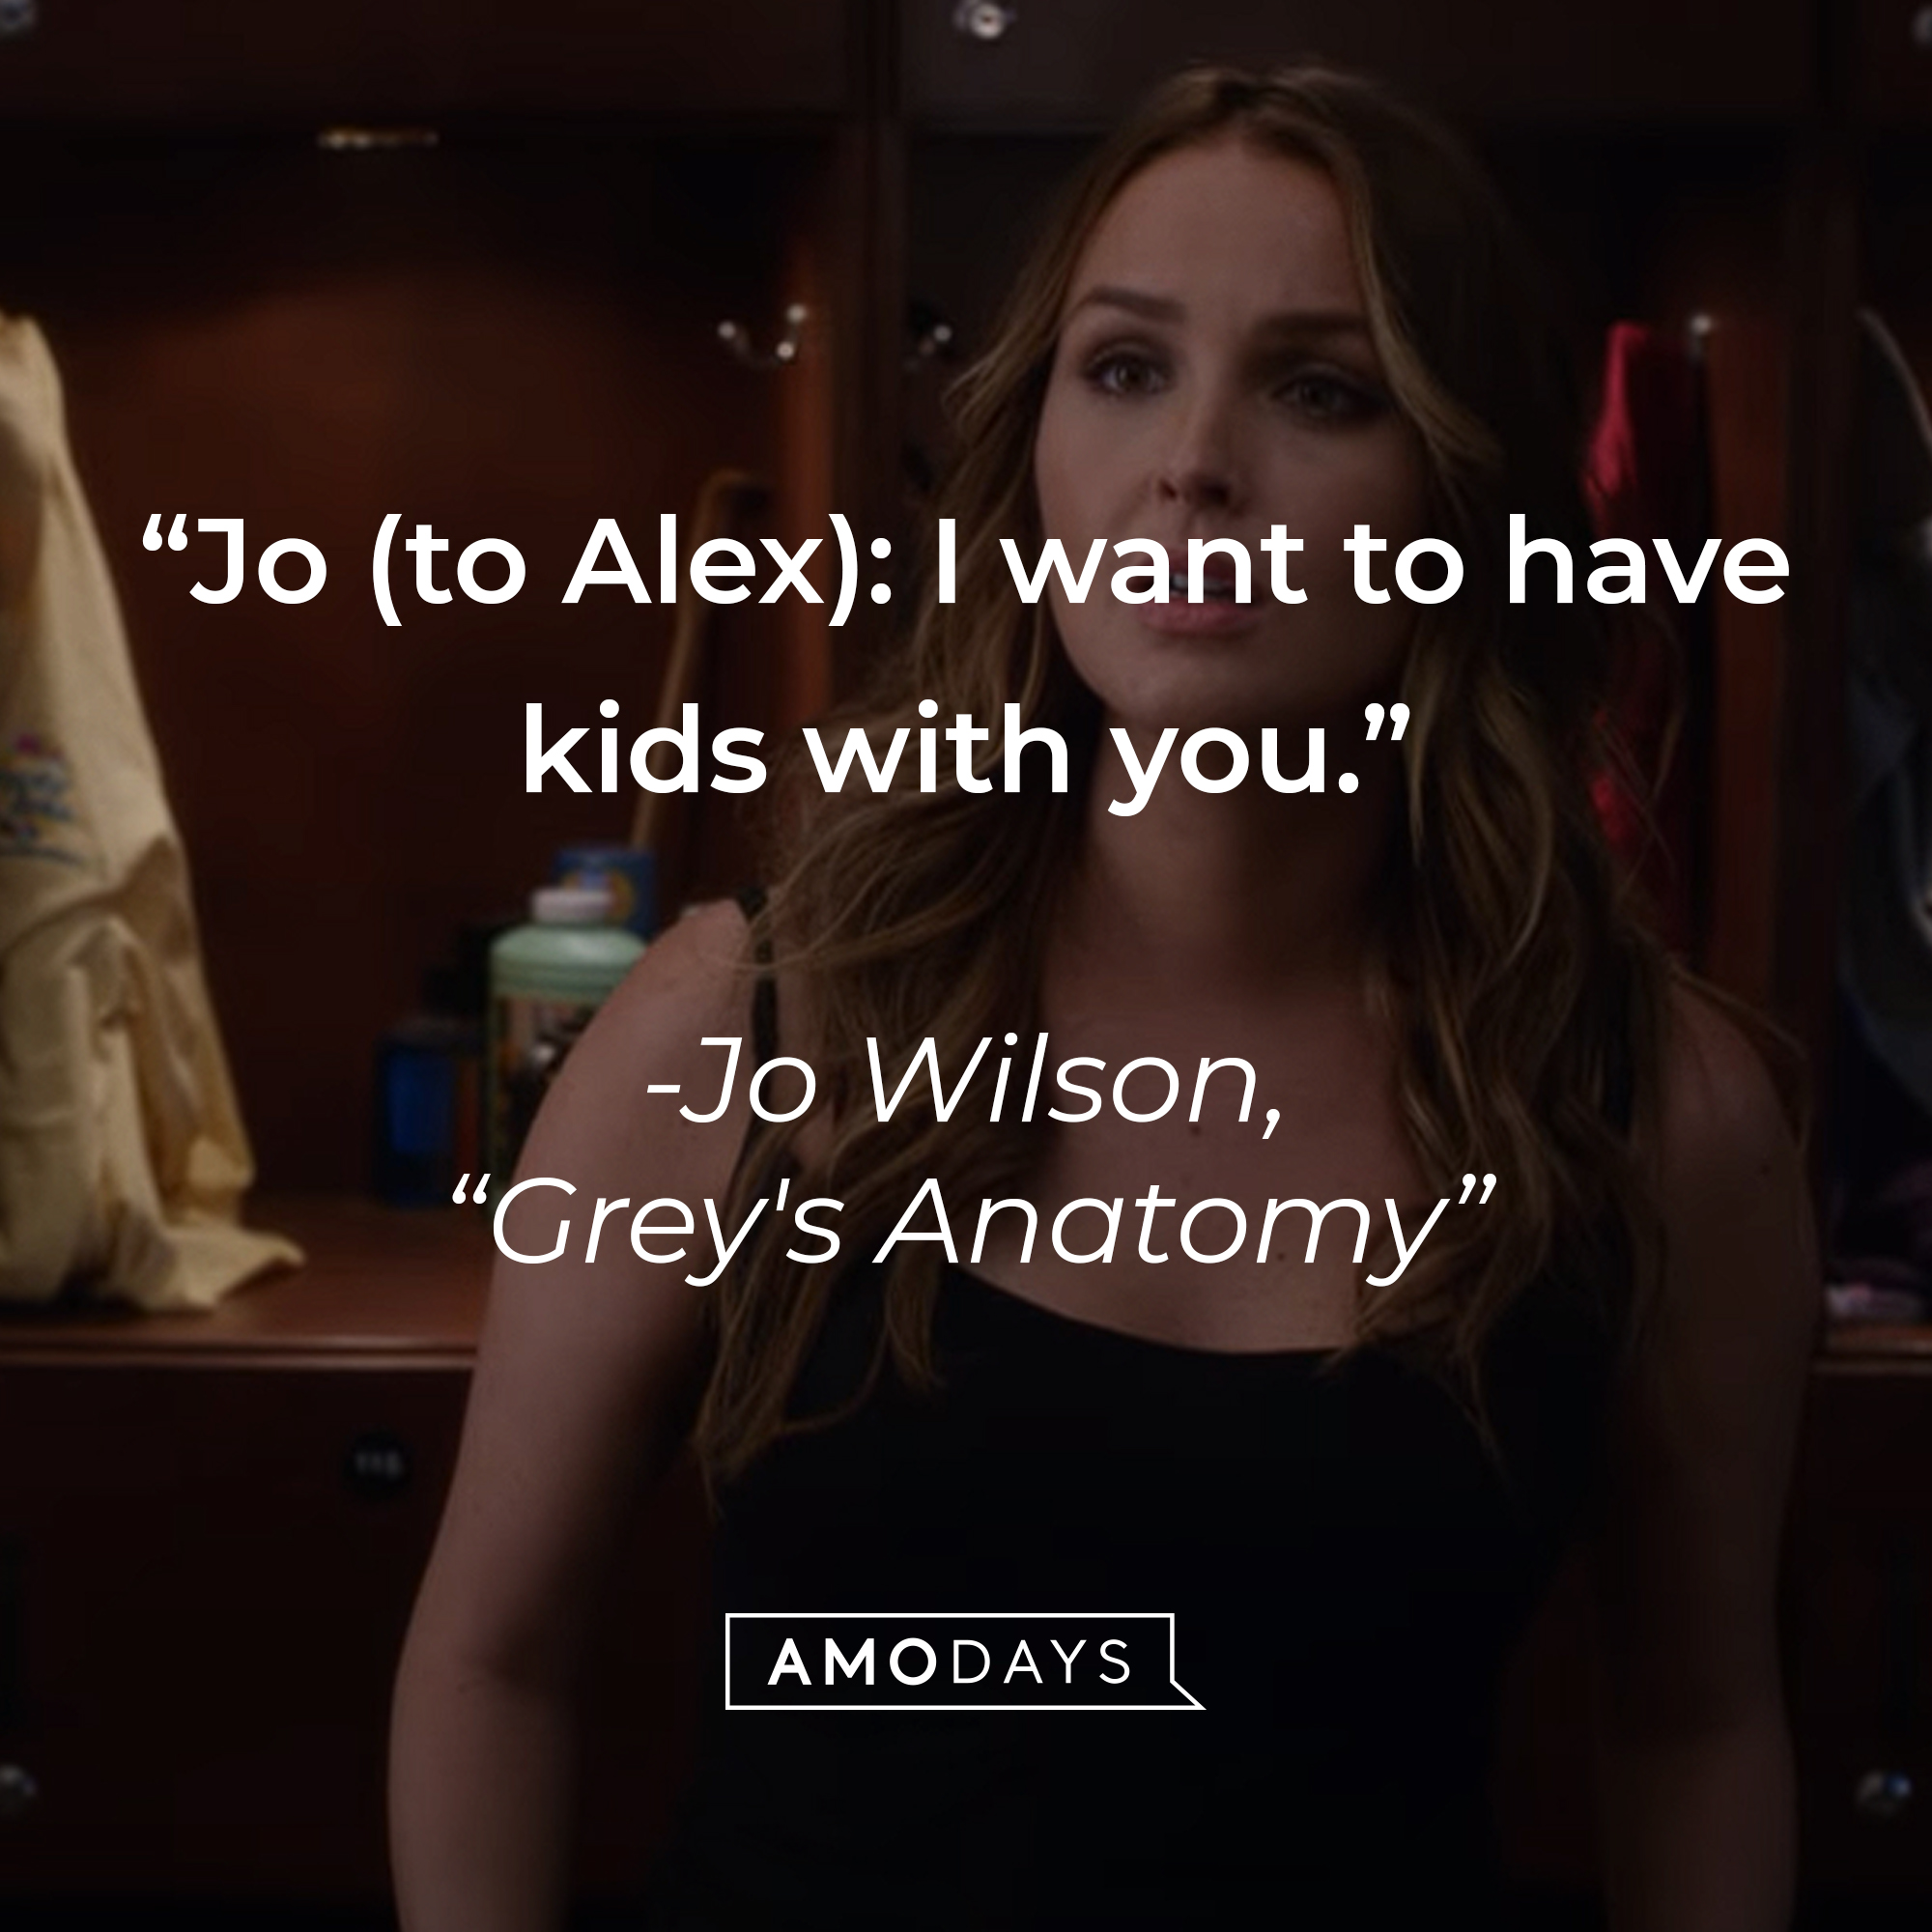 Jo Wilson’s quote from “Grey’s Anatomy”: “Jo (to Alex): I want to have kids with you.” | Source: youtube.com/ABCNetwork